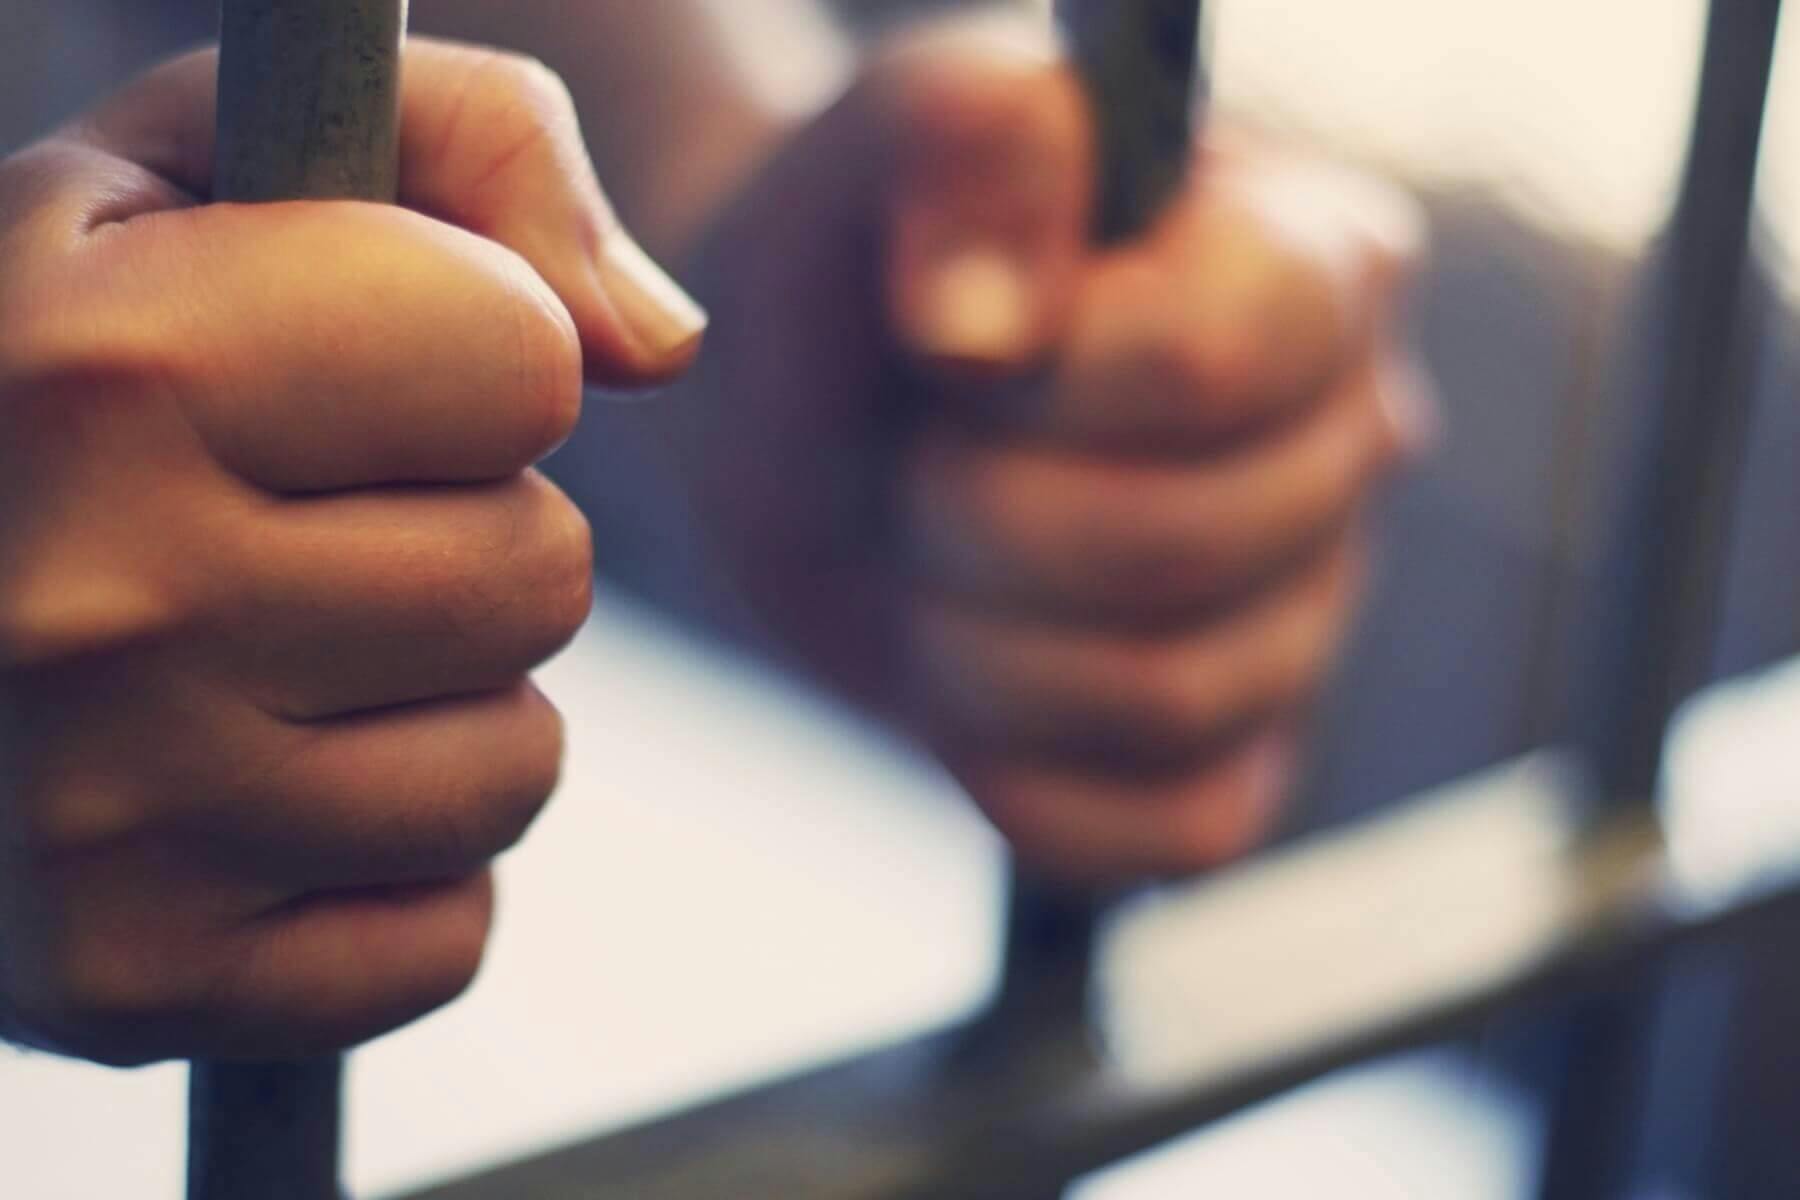 A pair of hands holding the bars of a prison cell